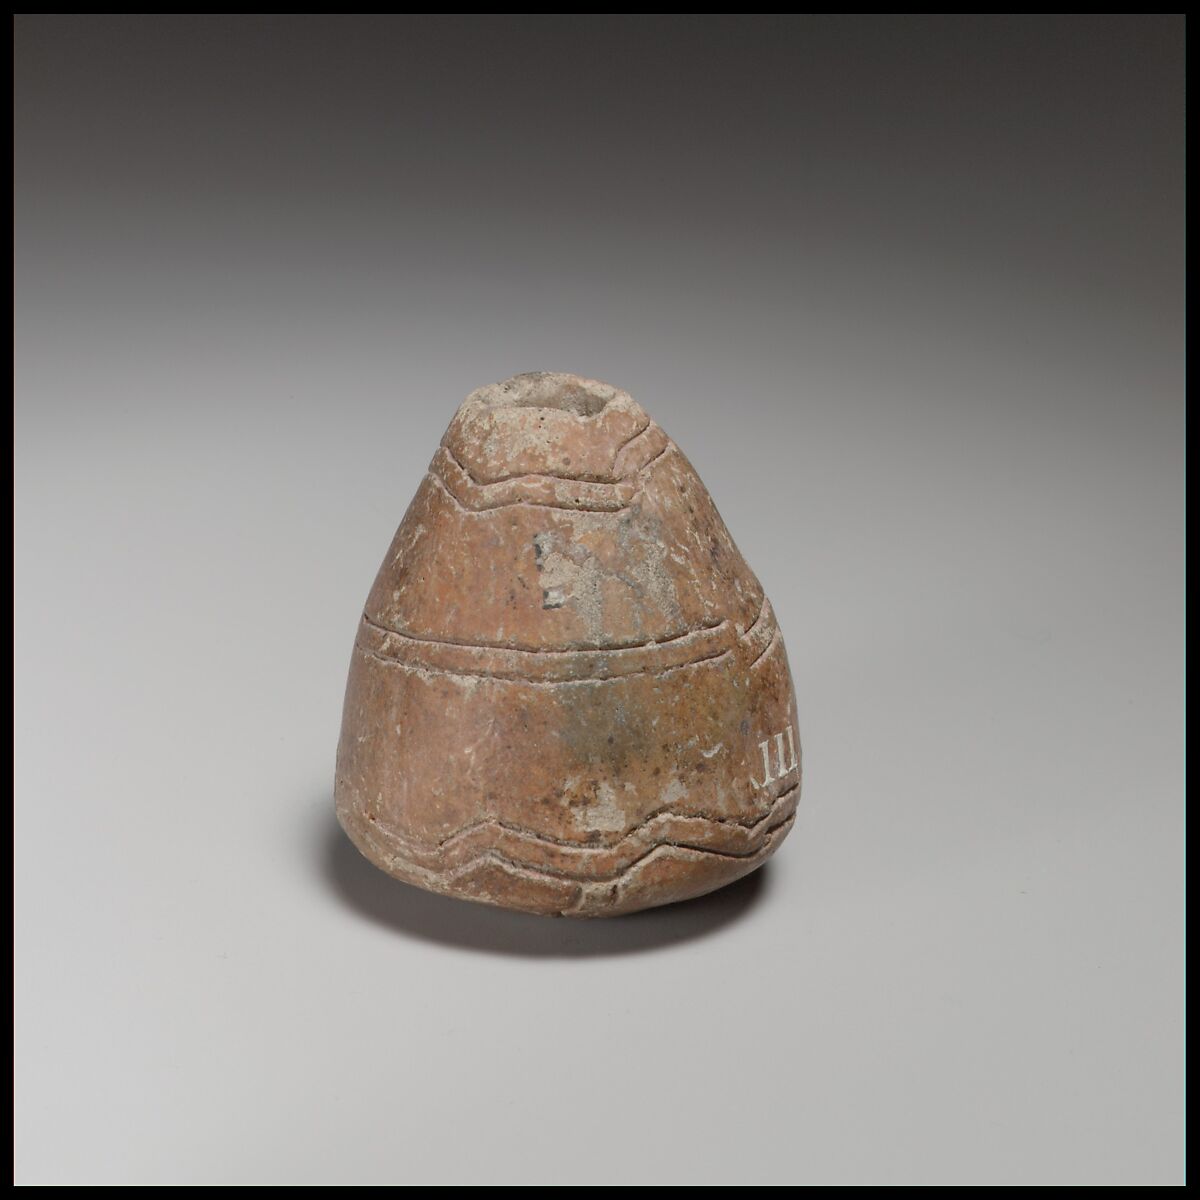 Conical-hemispherical spindle-whorl with slightly rounded base, Terracotta, Cypriot 